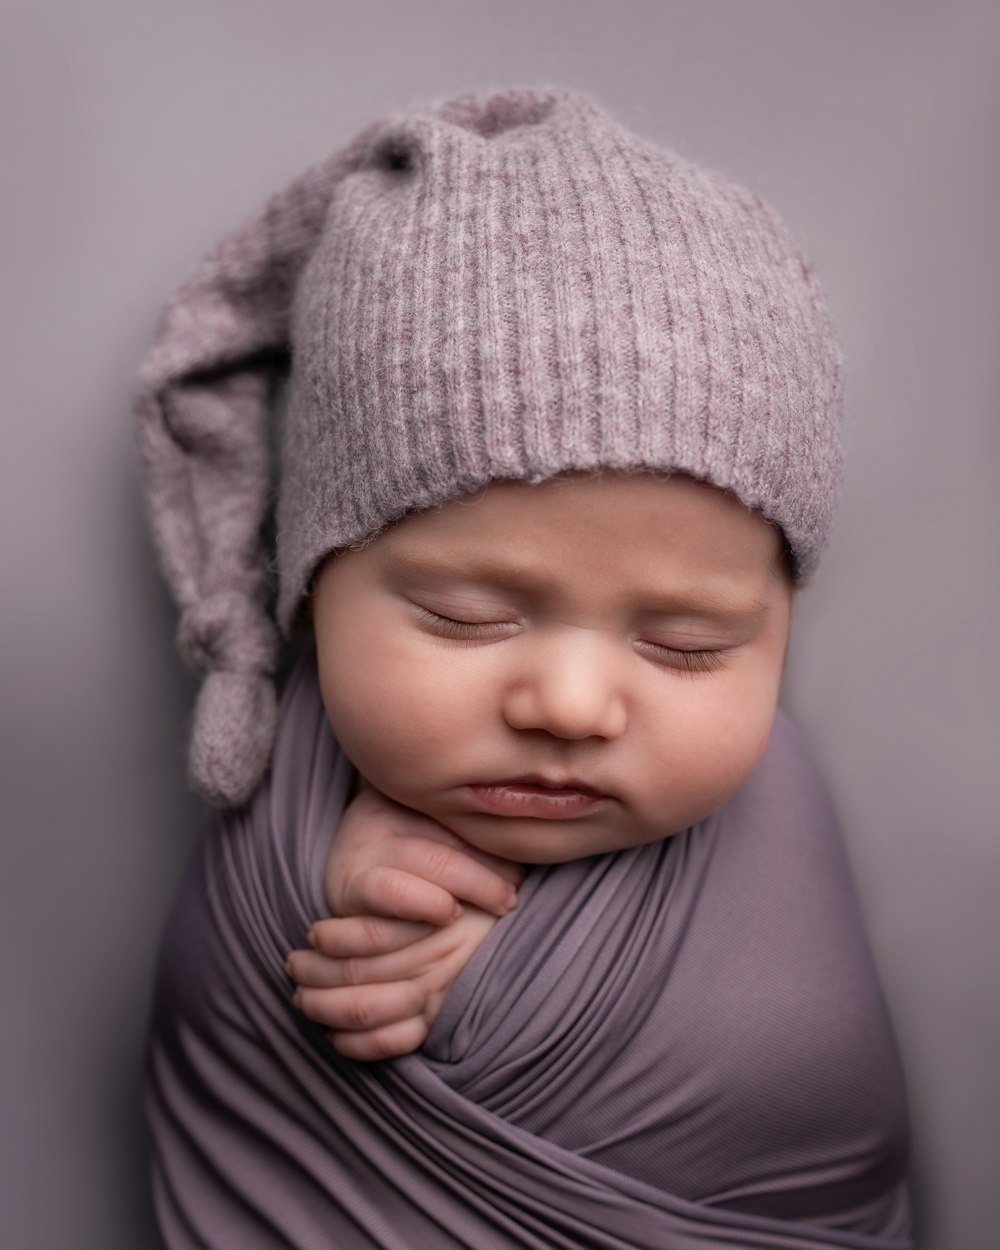 500+ Newborn Baby Pictures [HD] | Download Free Images on Unsplash